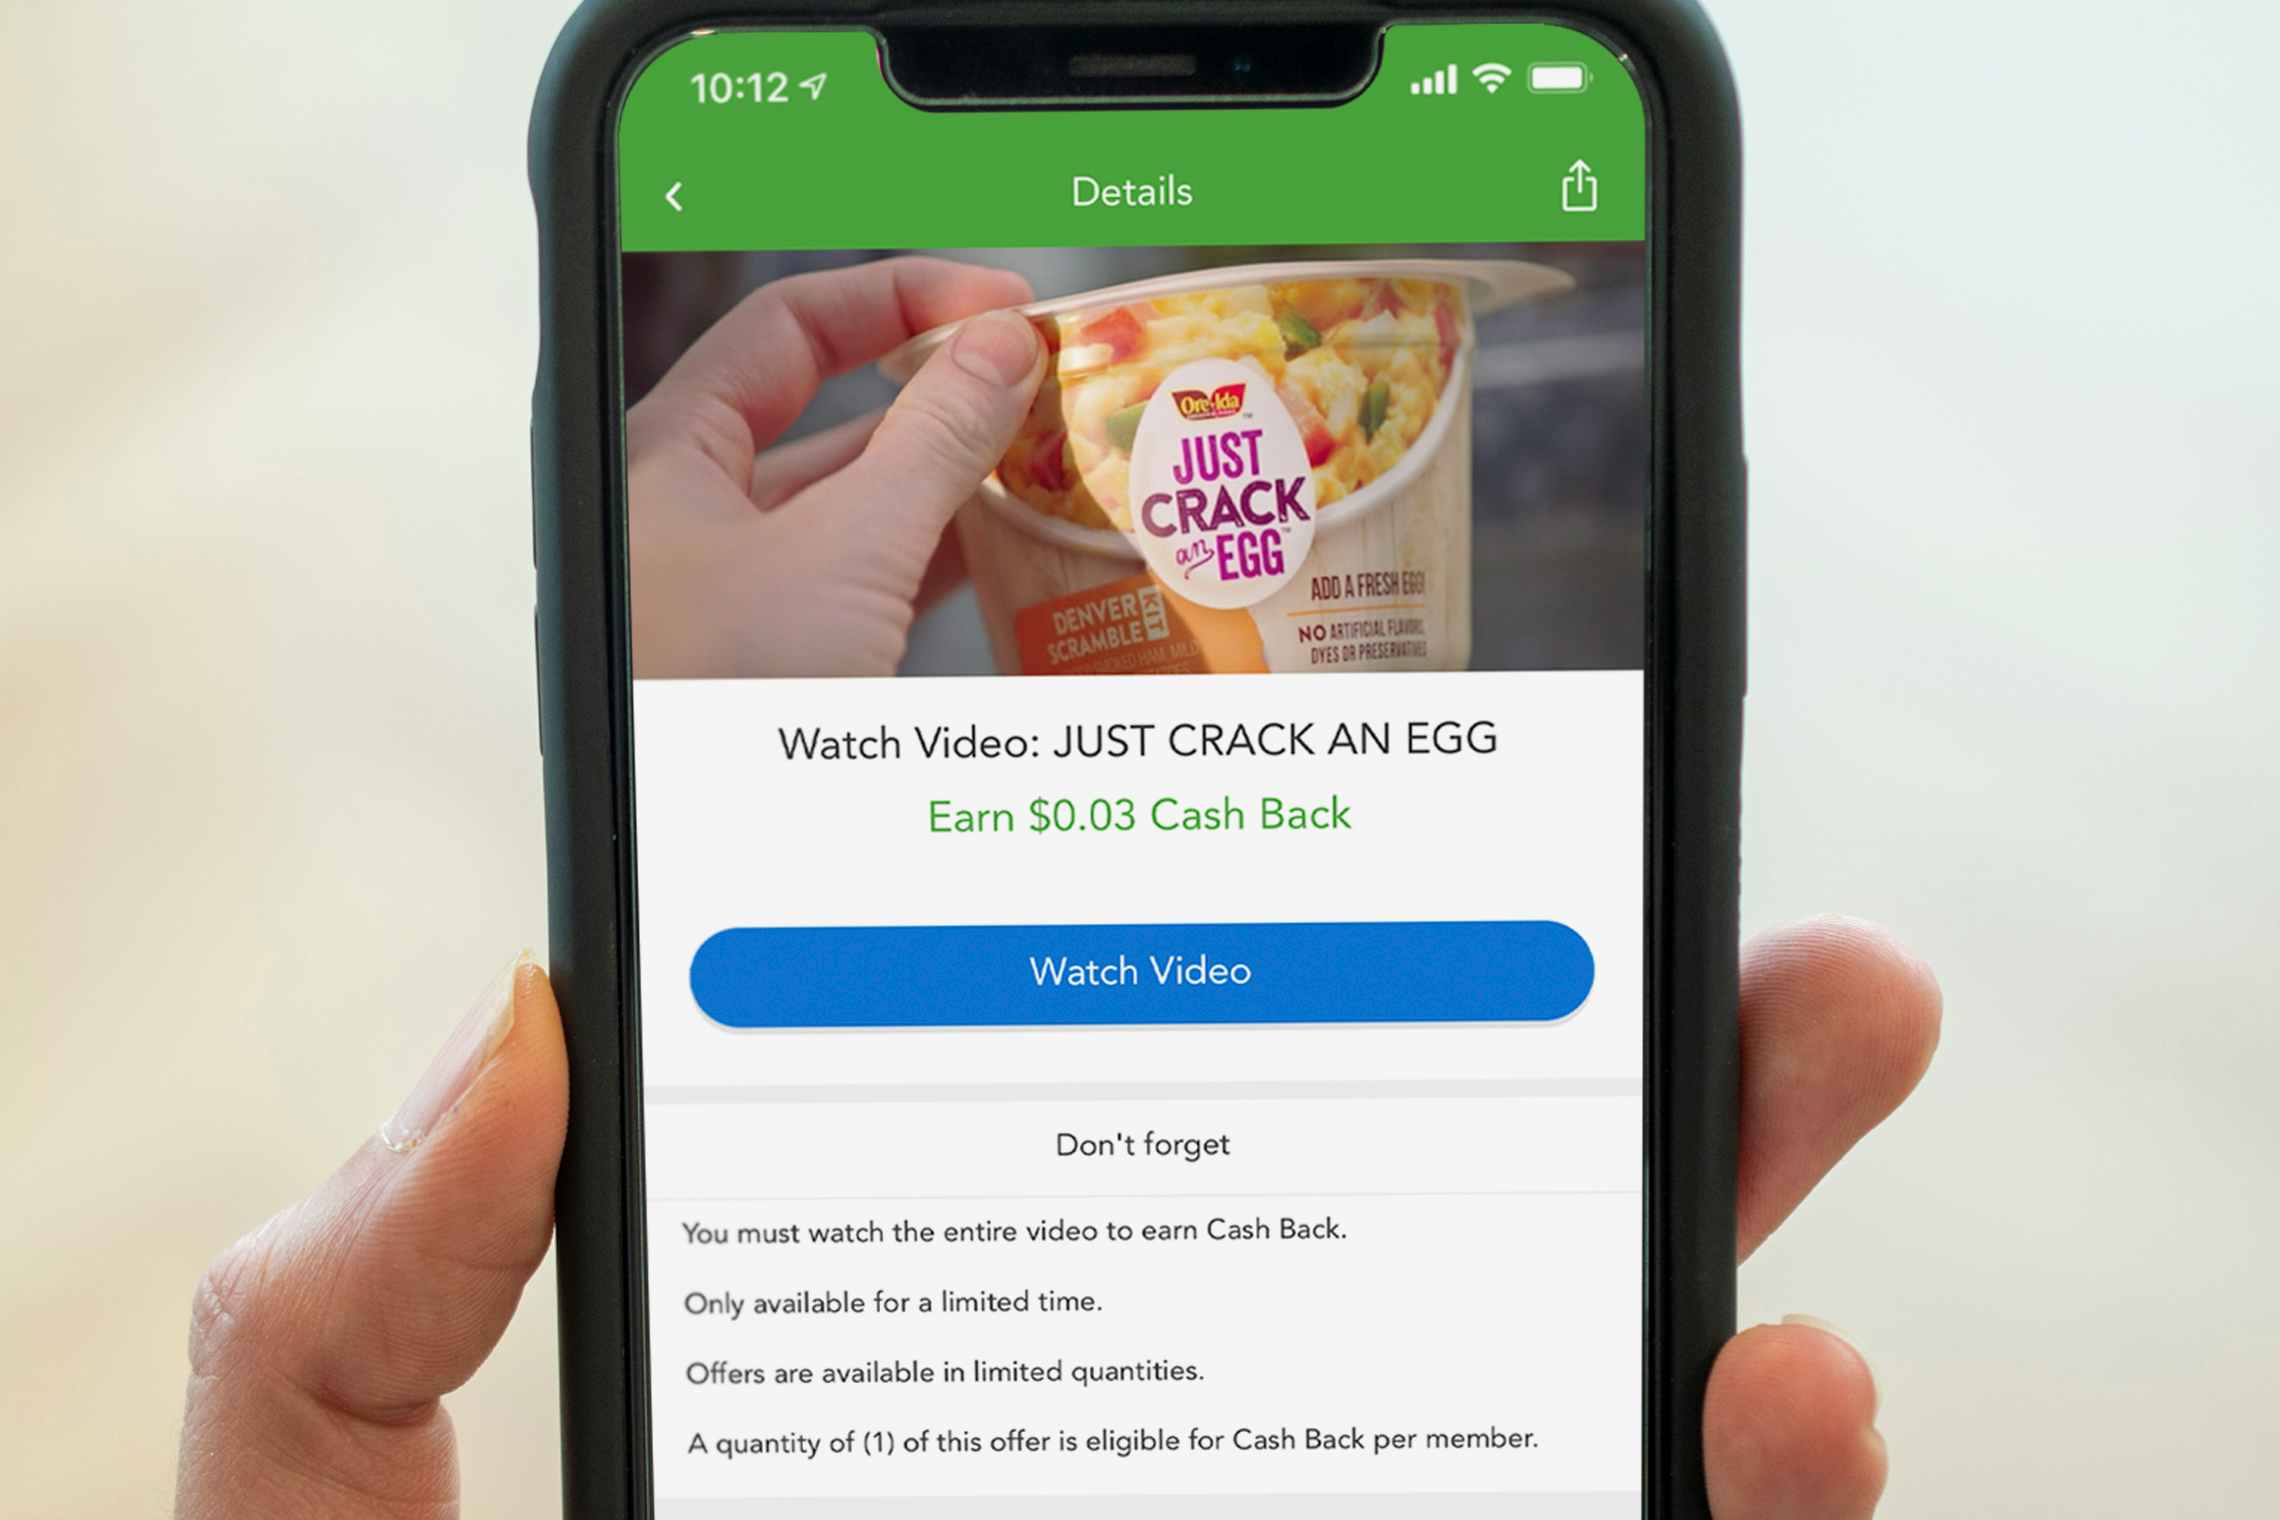 Watch Video to earn cash pack offer on the Checkout51 app